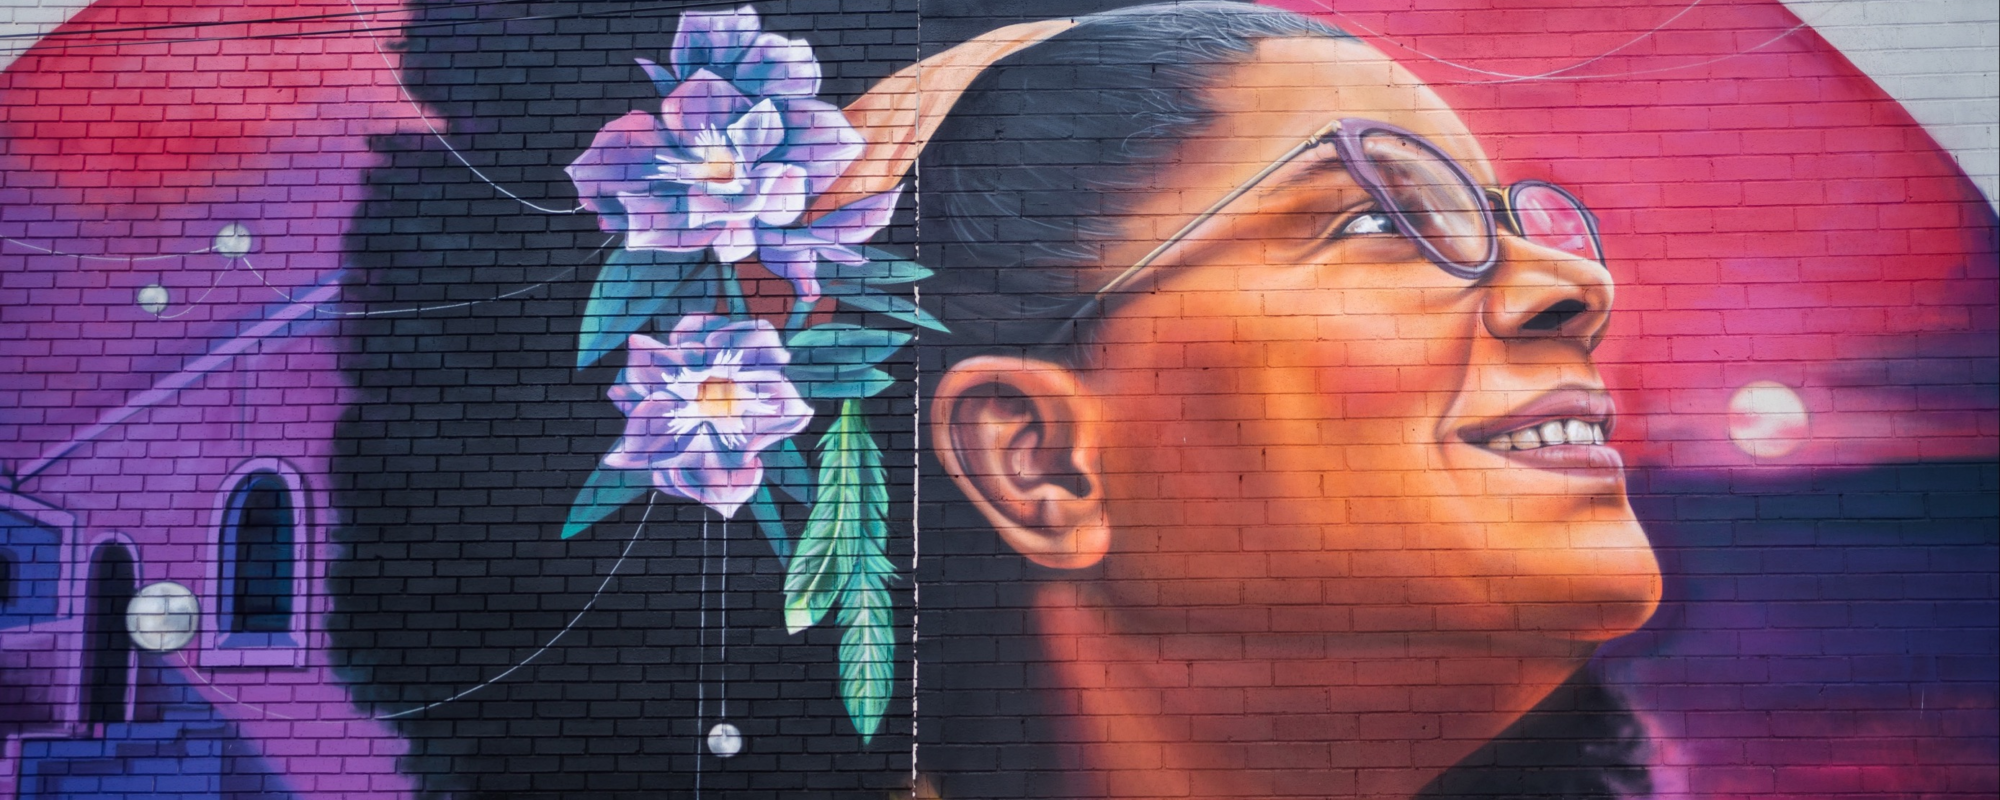 Vibrant mural of an African American woman.